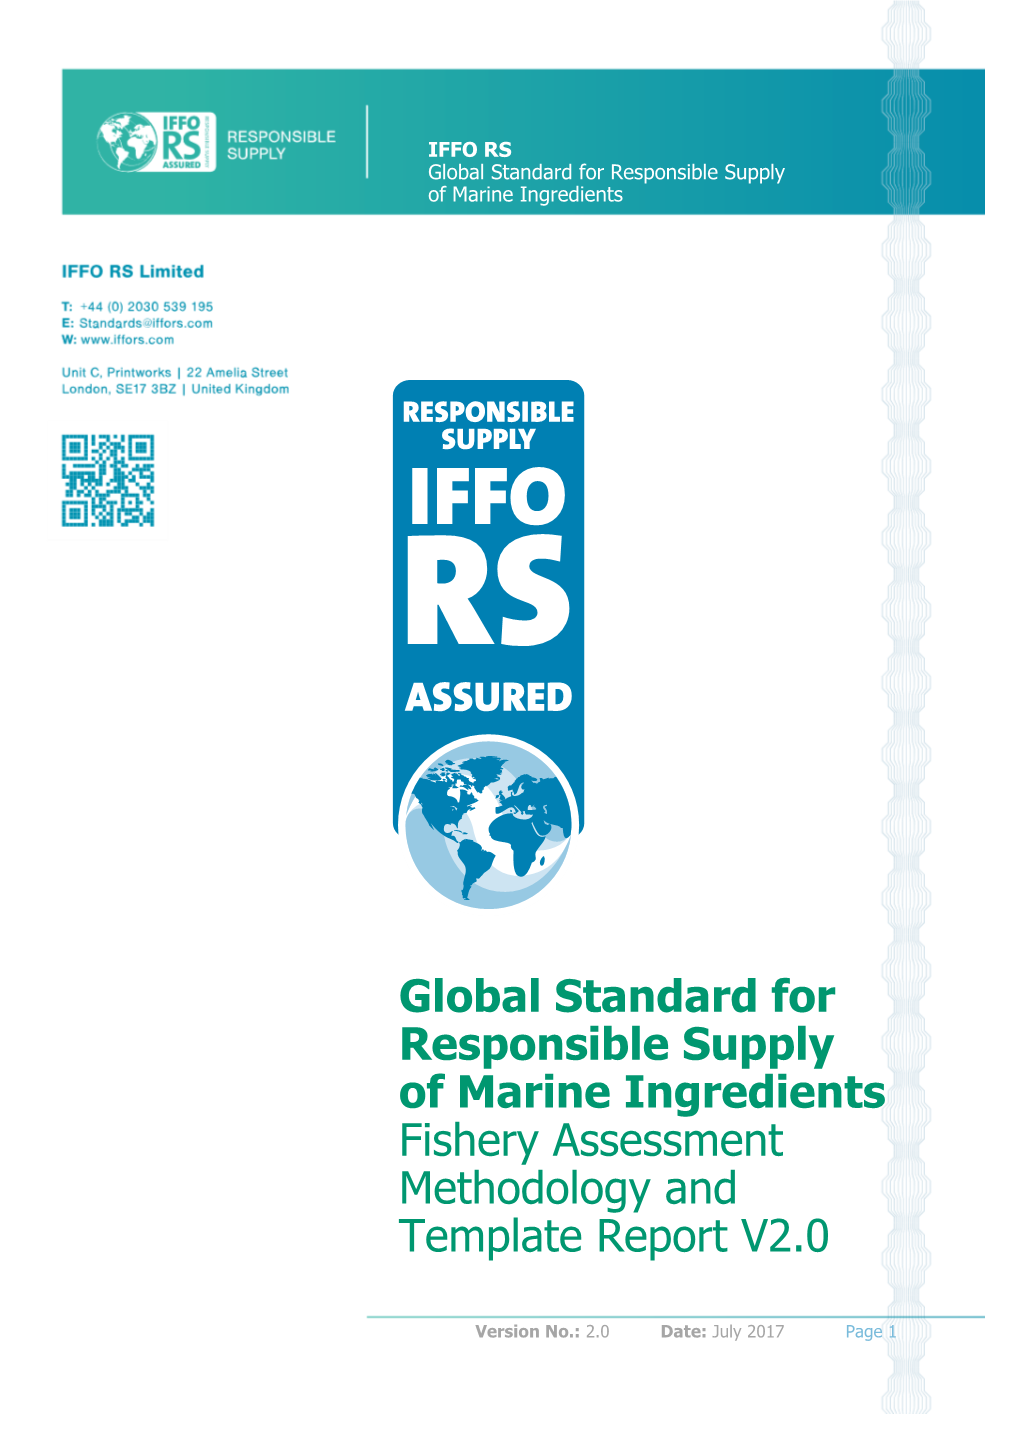 Global Standard for Responsible Supply of Marine Ingredients Fishery Assessment Methodology and Template Report V2.0